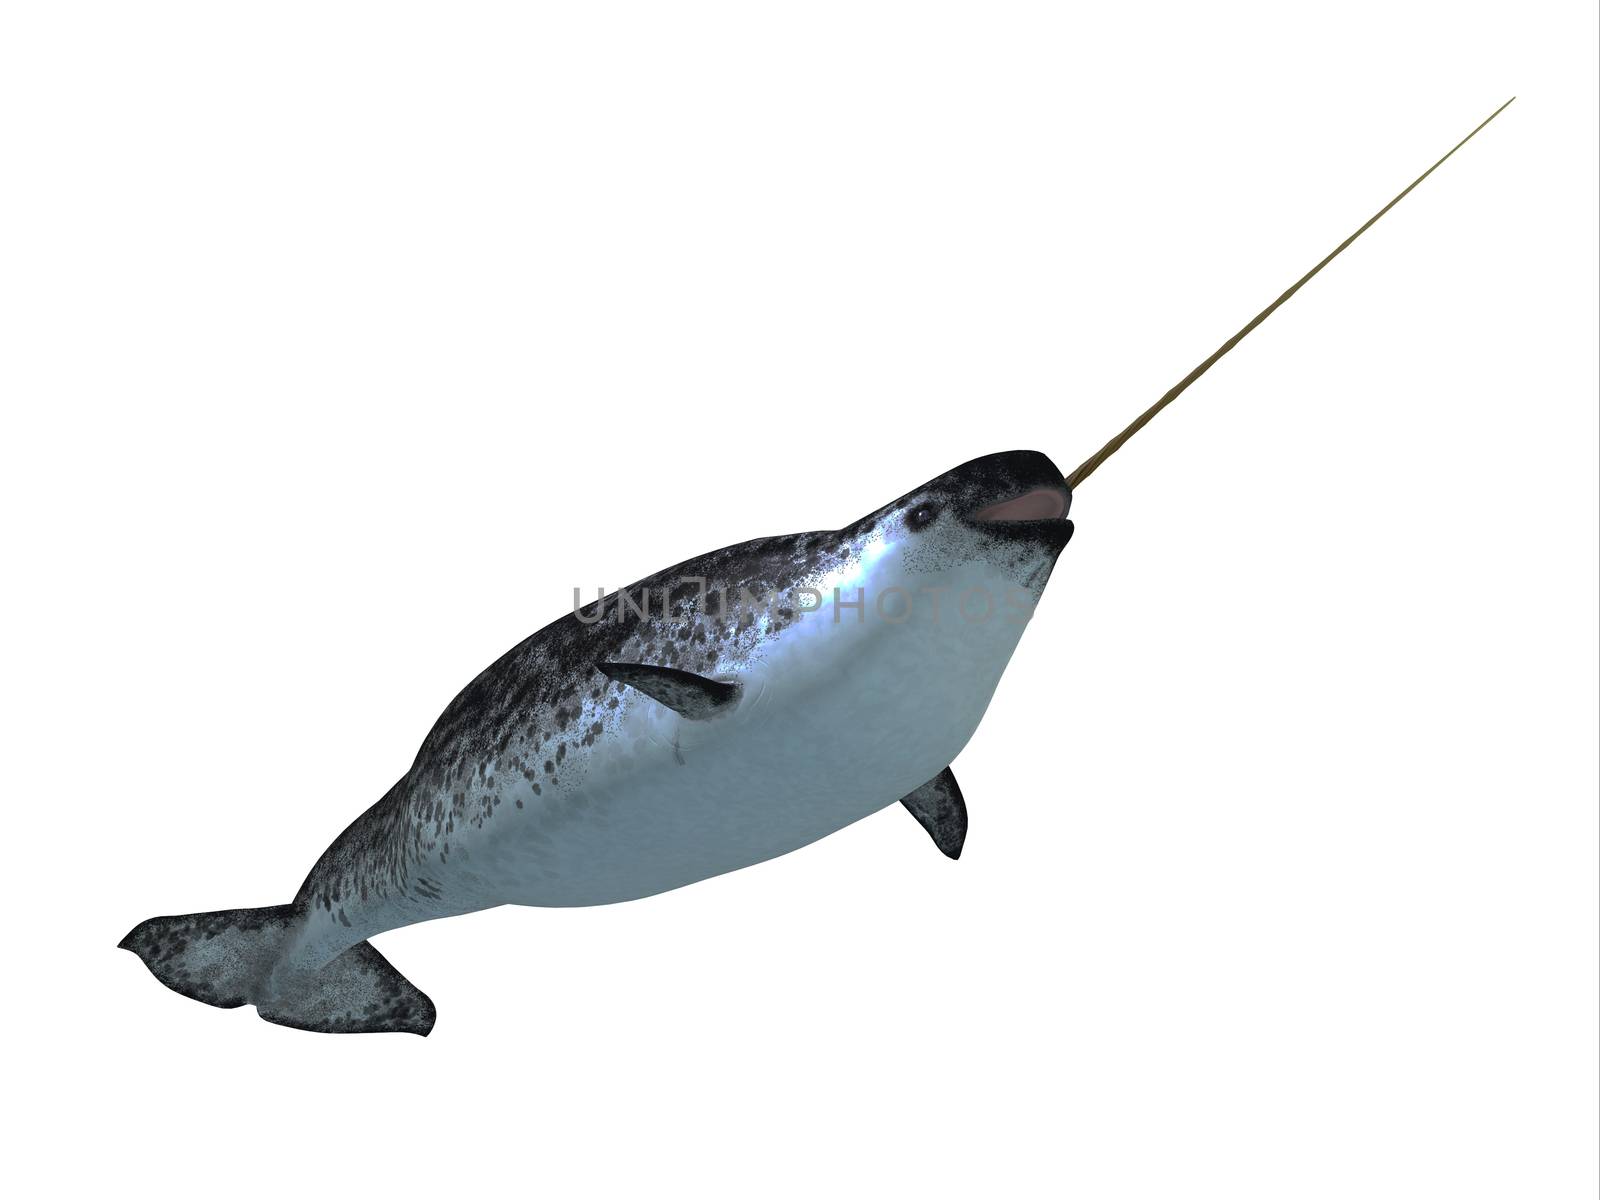 Narwhal whales live in social groups called pods and live in the Arctic ocean and males have a tusk.